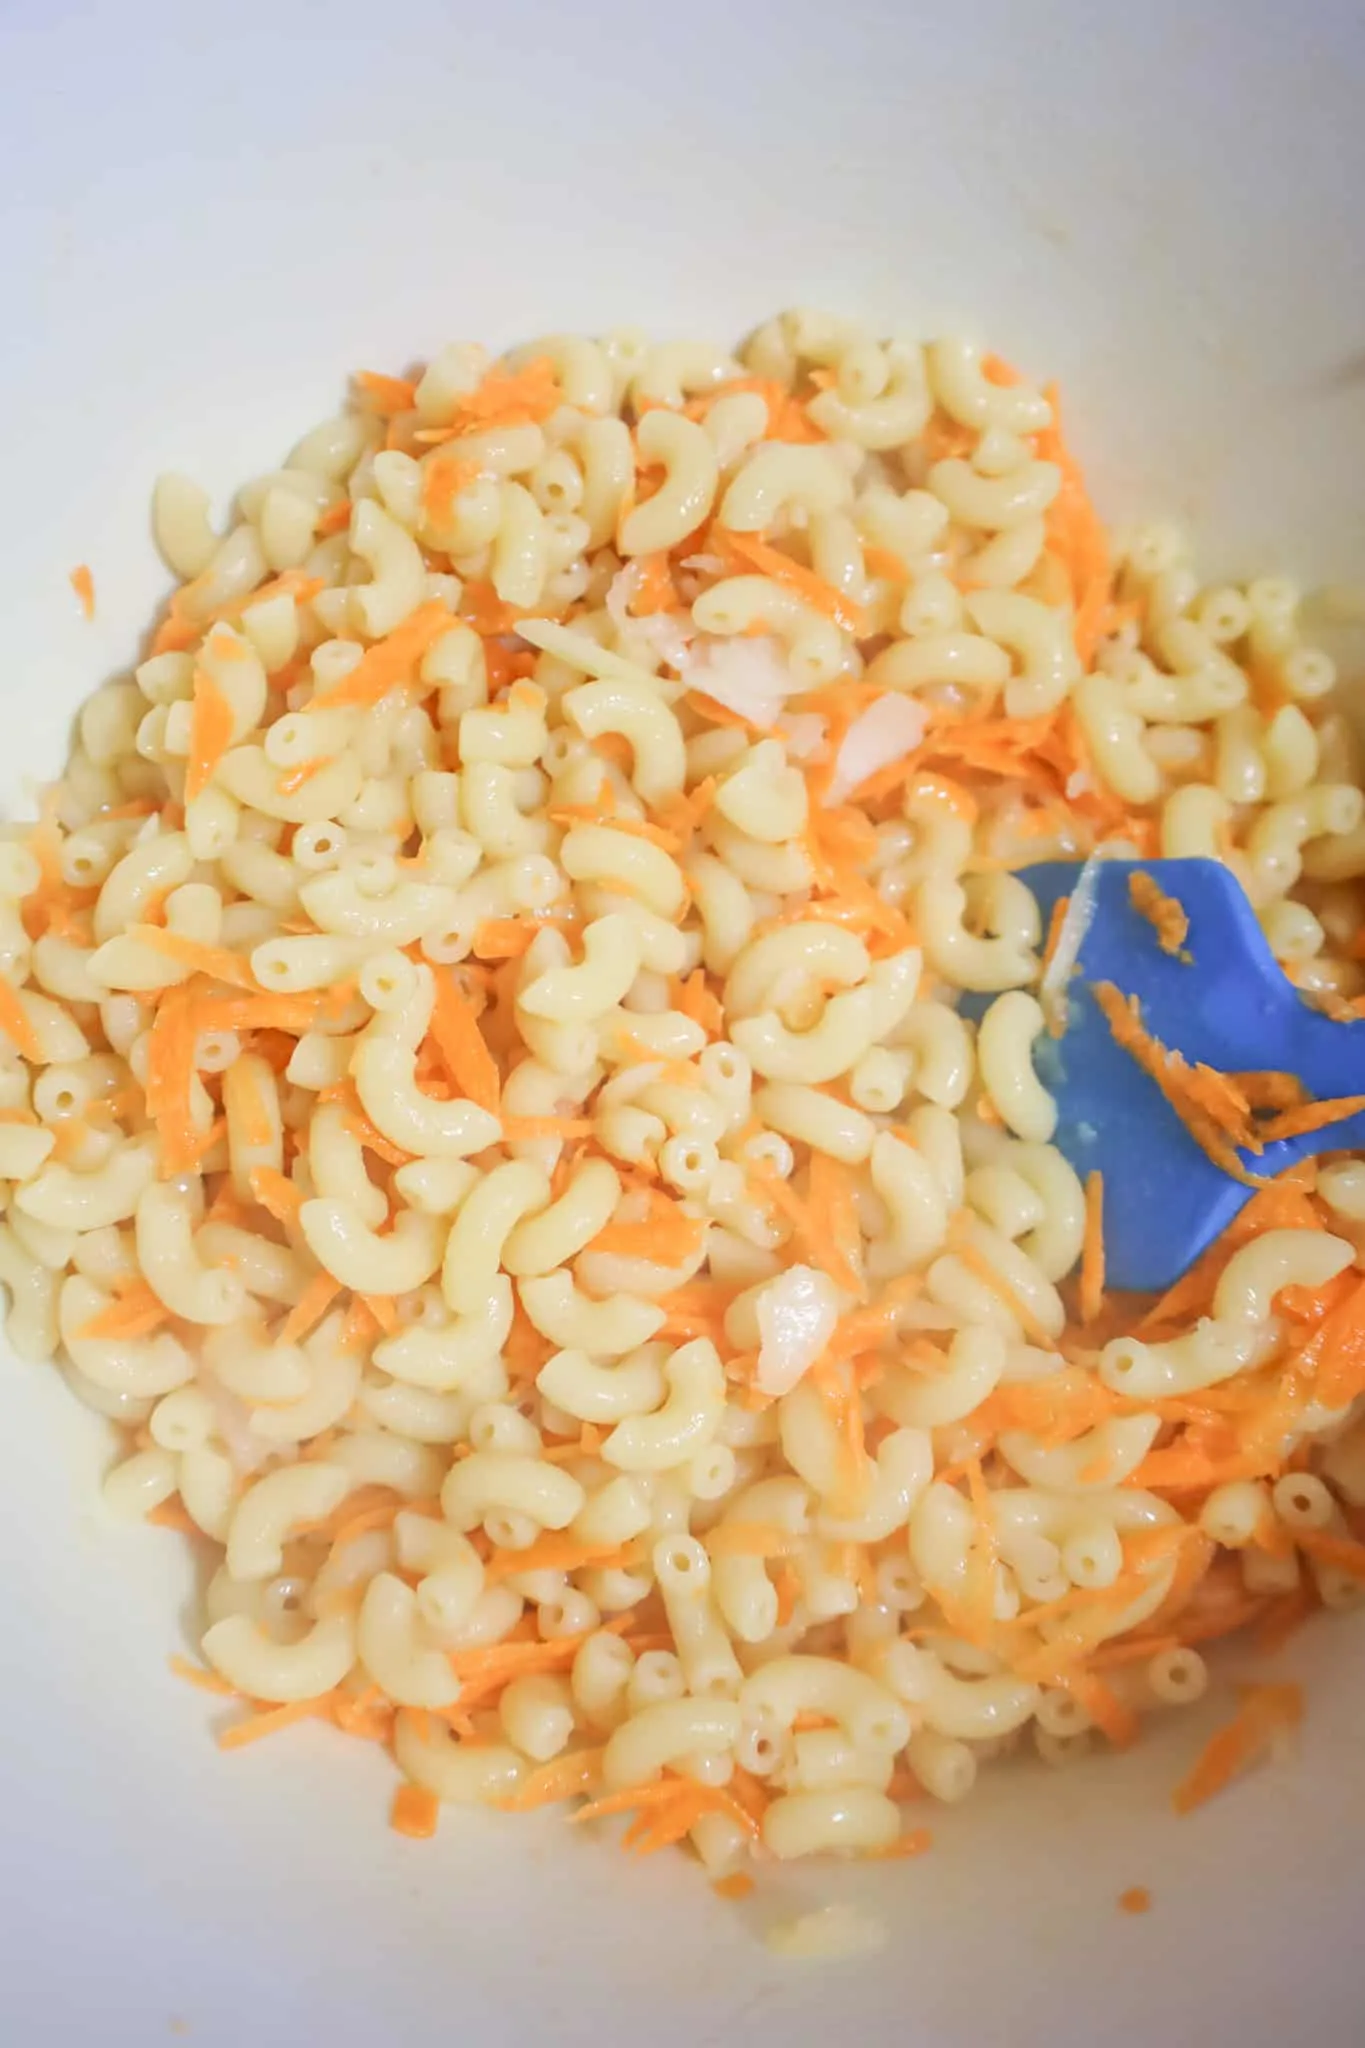 macaroni and grated carrot stirred together in a mixing bowl